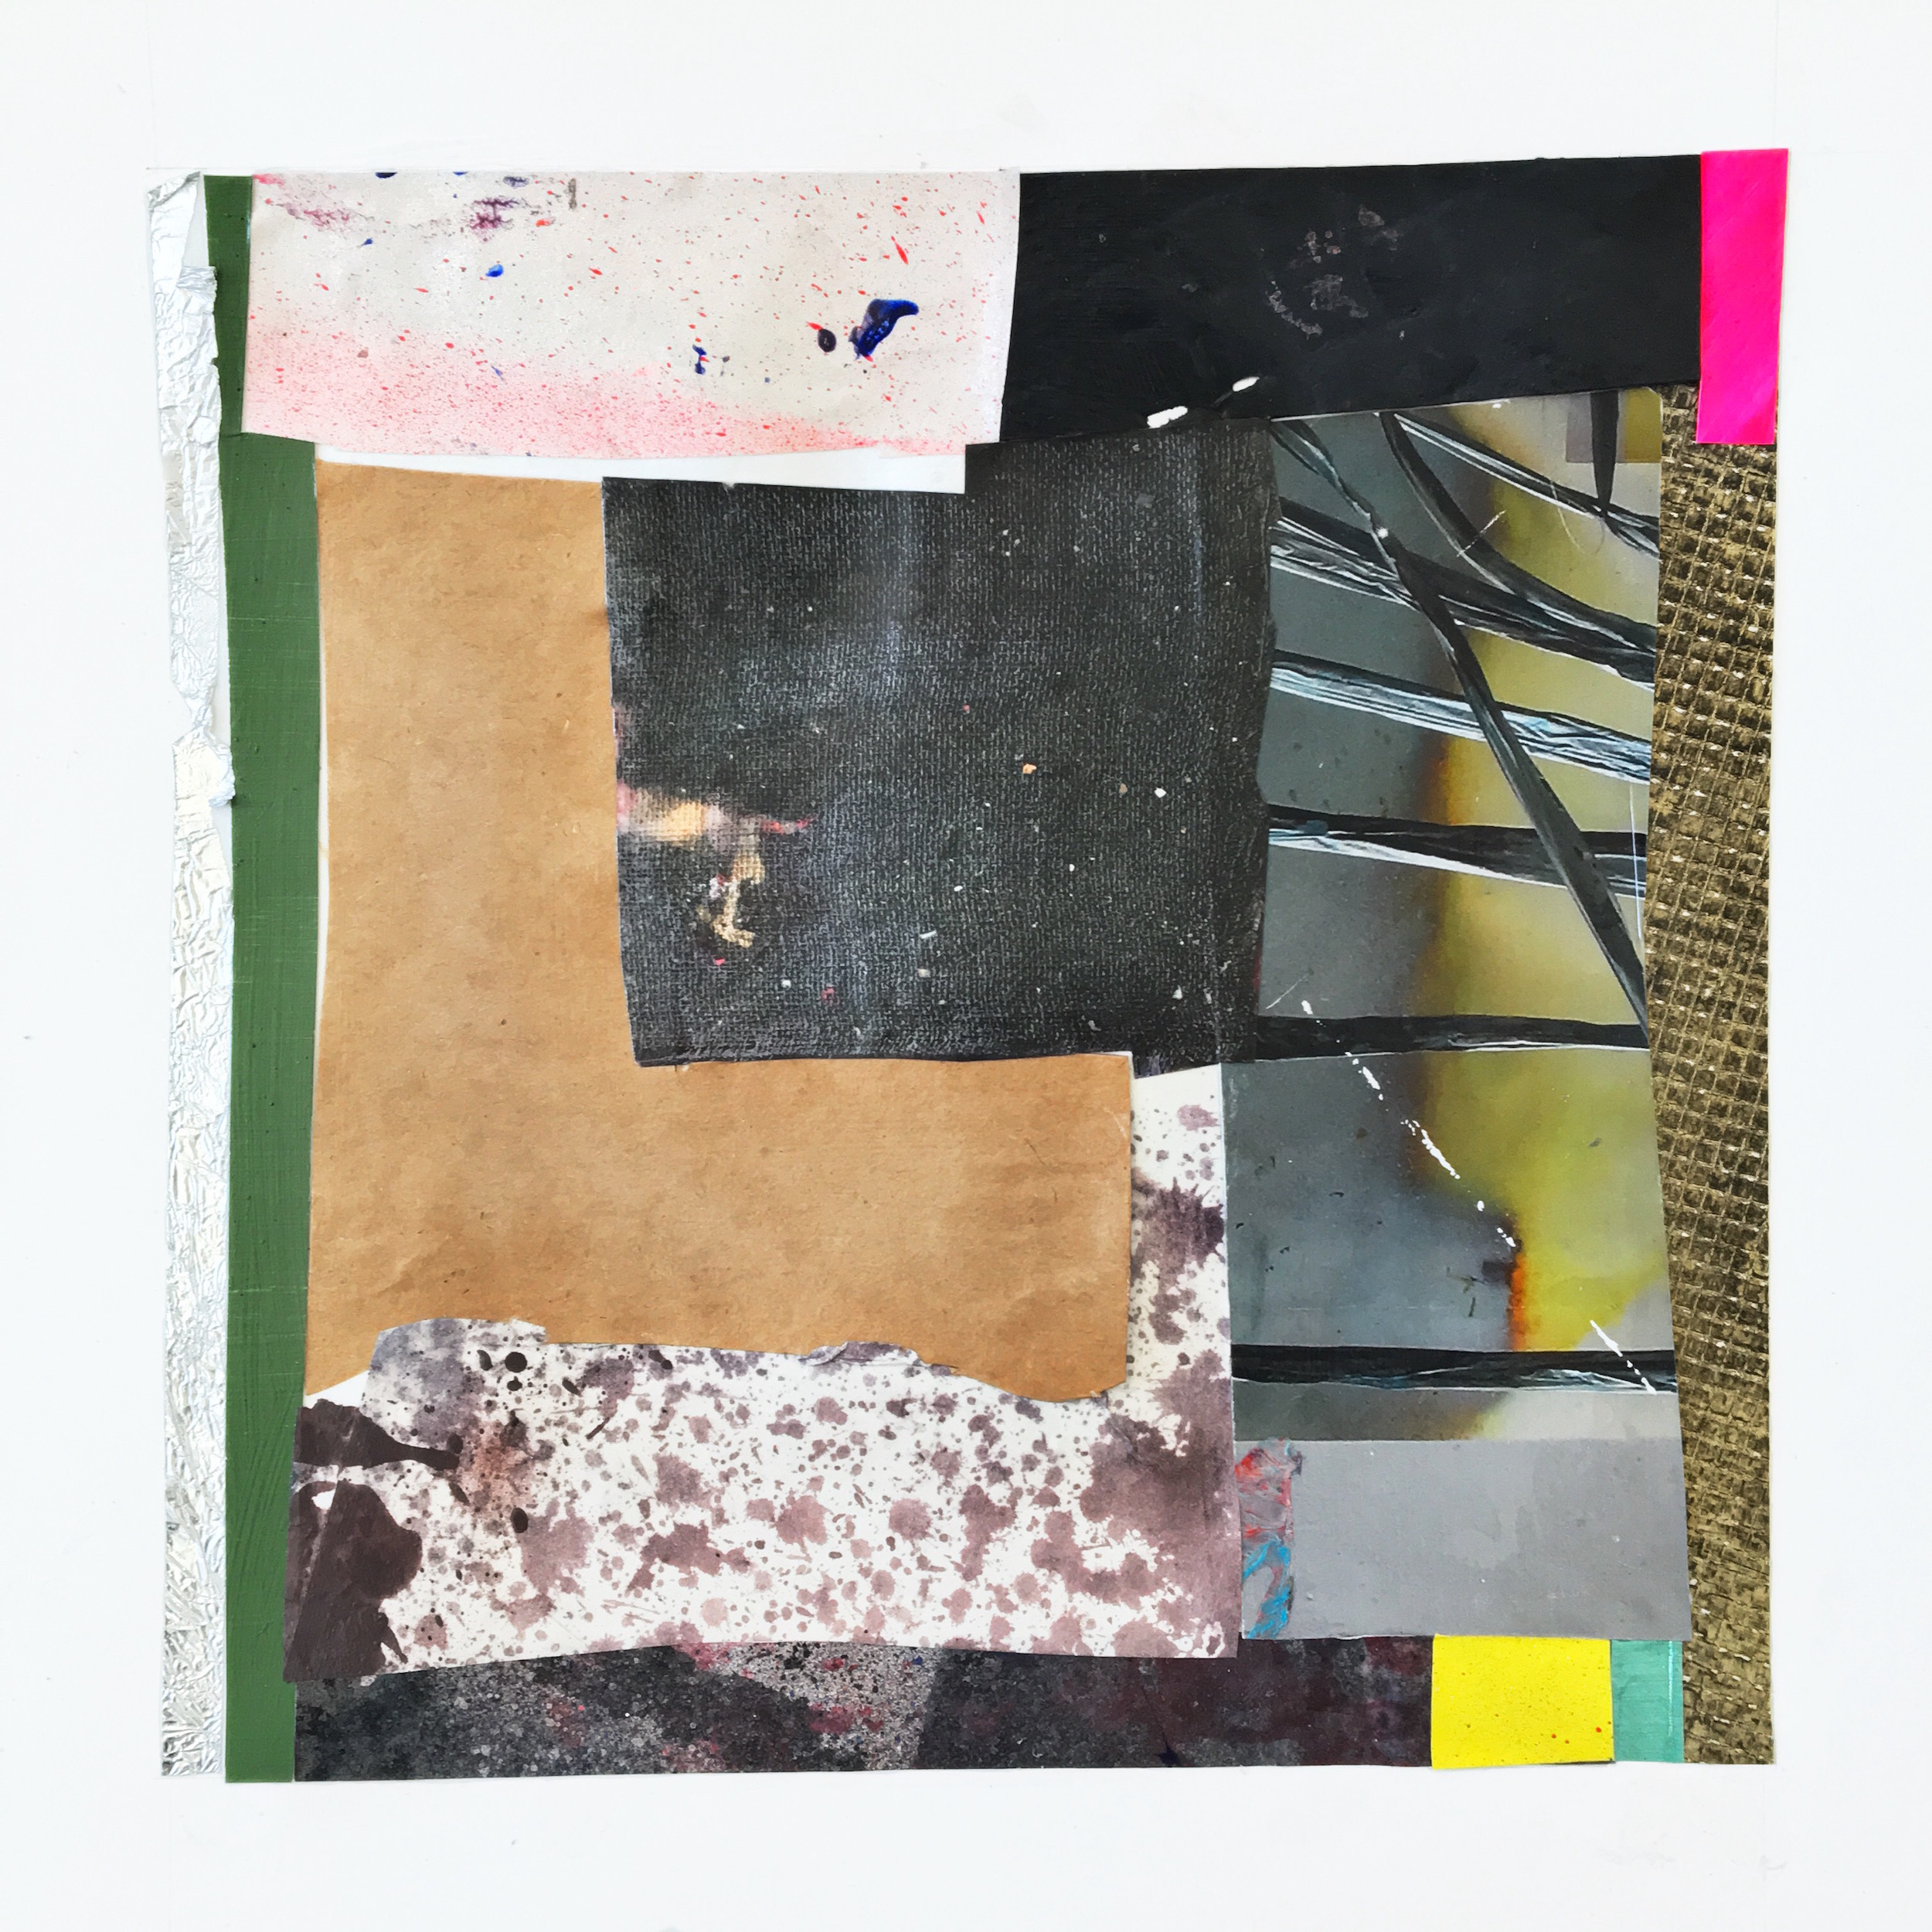  IAIN MUIRHEAD   18136:18160,   2018. Peripheral painting aggregate (2014-2018) collage on paper. 8 x 8 inches each.    